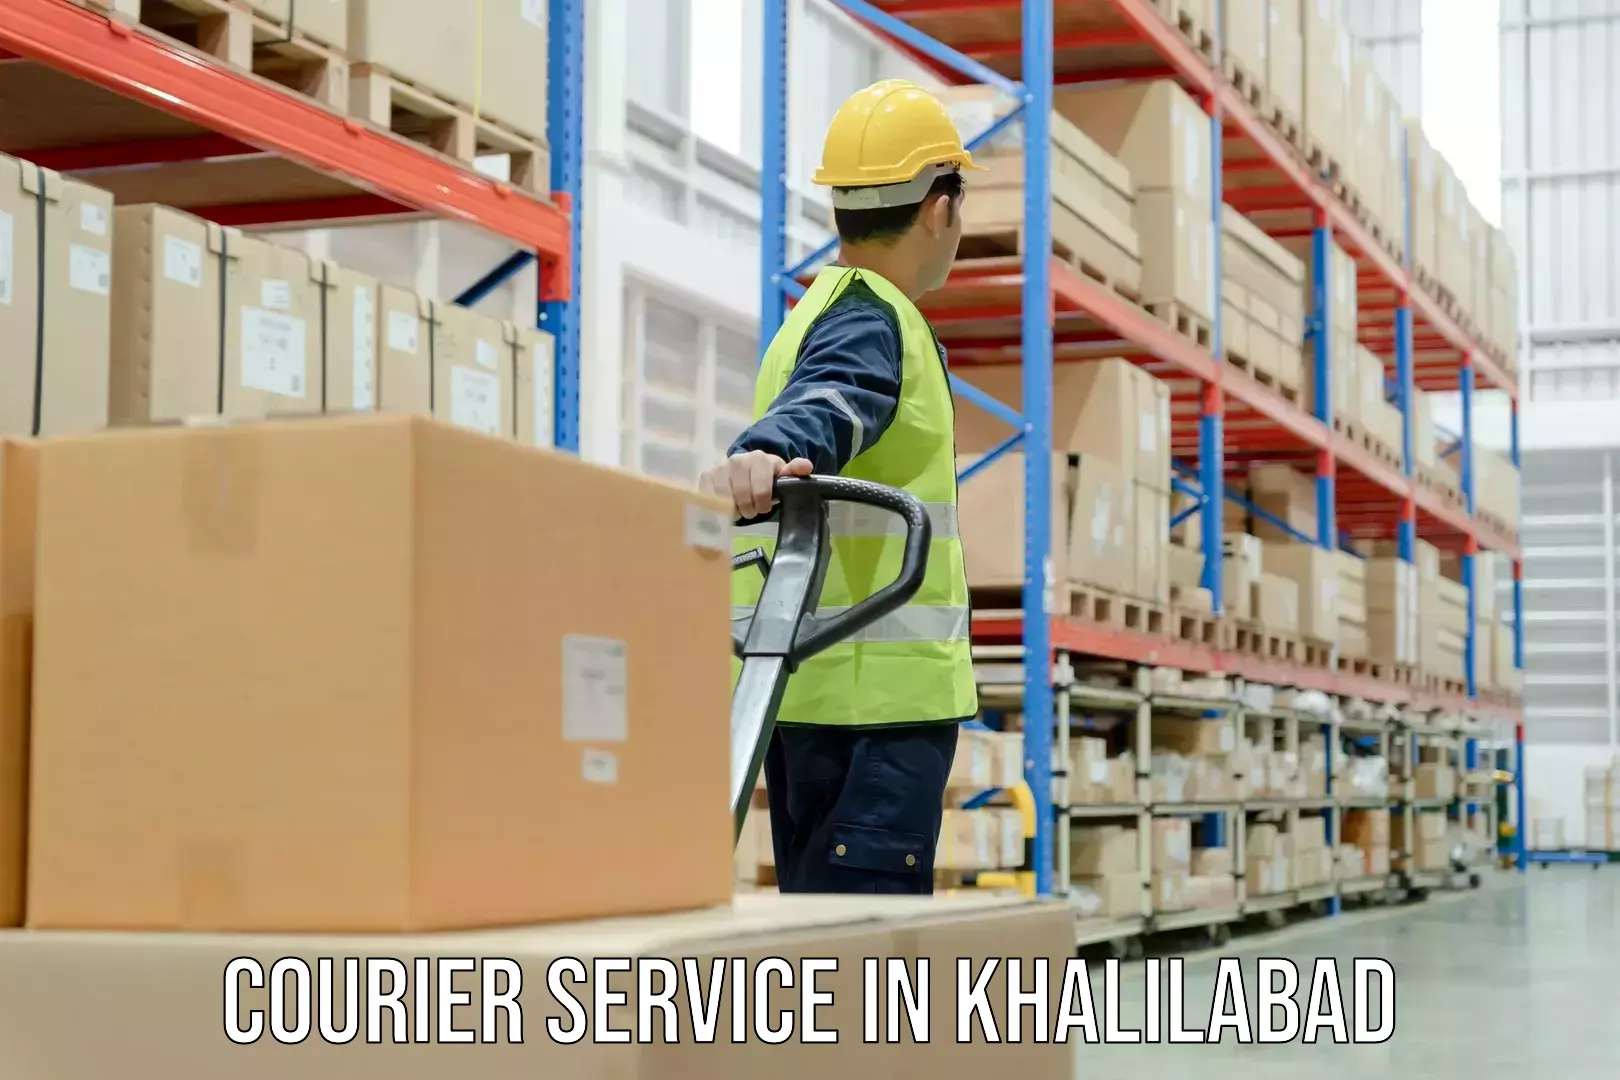 On-demand shipping options in Khalilabad